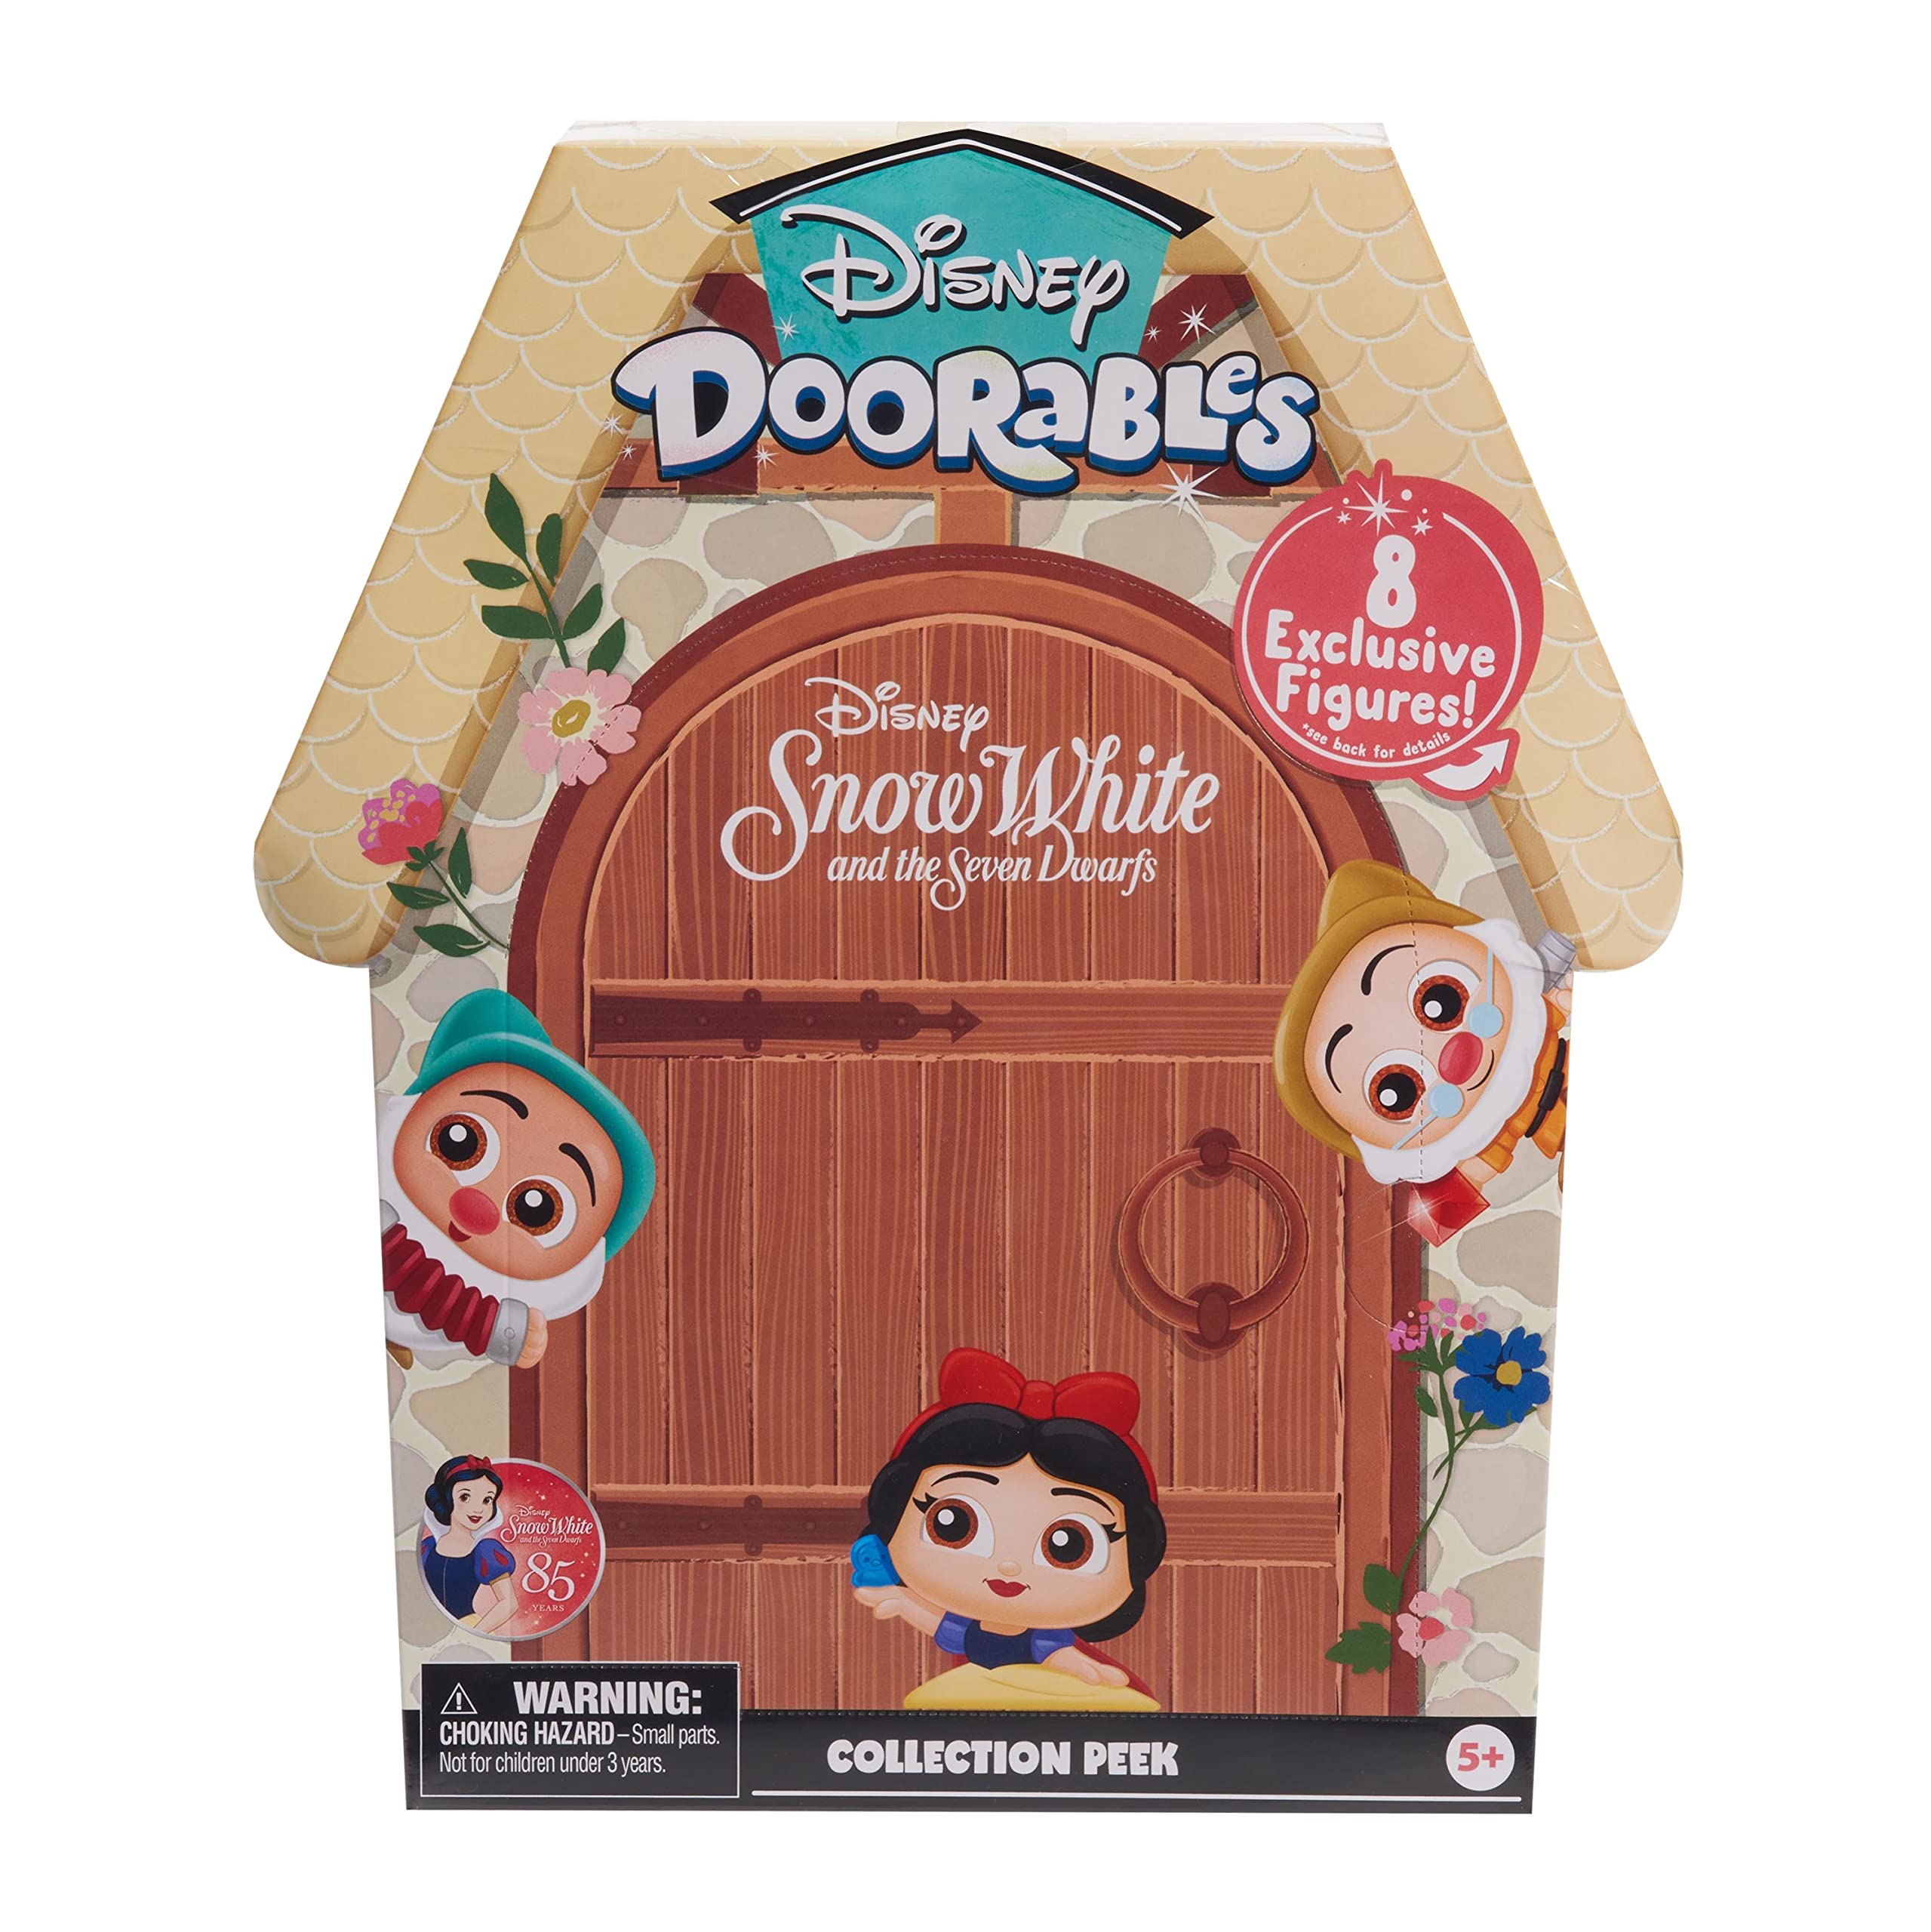 Disney Doorables Snow White Collection Peek, Officially Licensed Kids Toys for Ages 5 Up, Gifts and Presents by Just Play